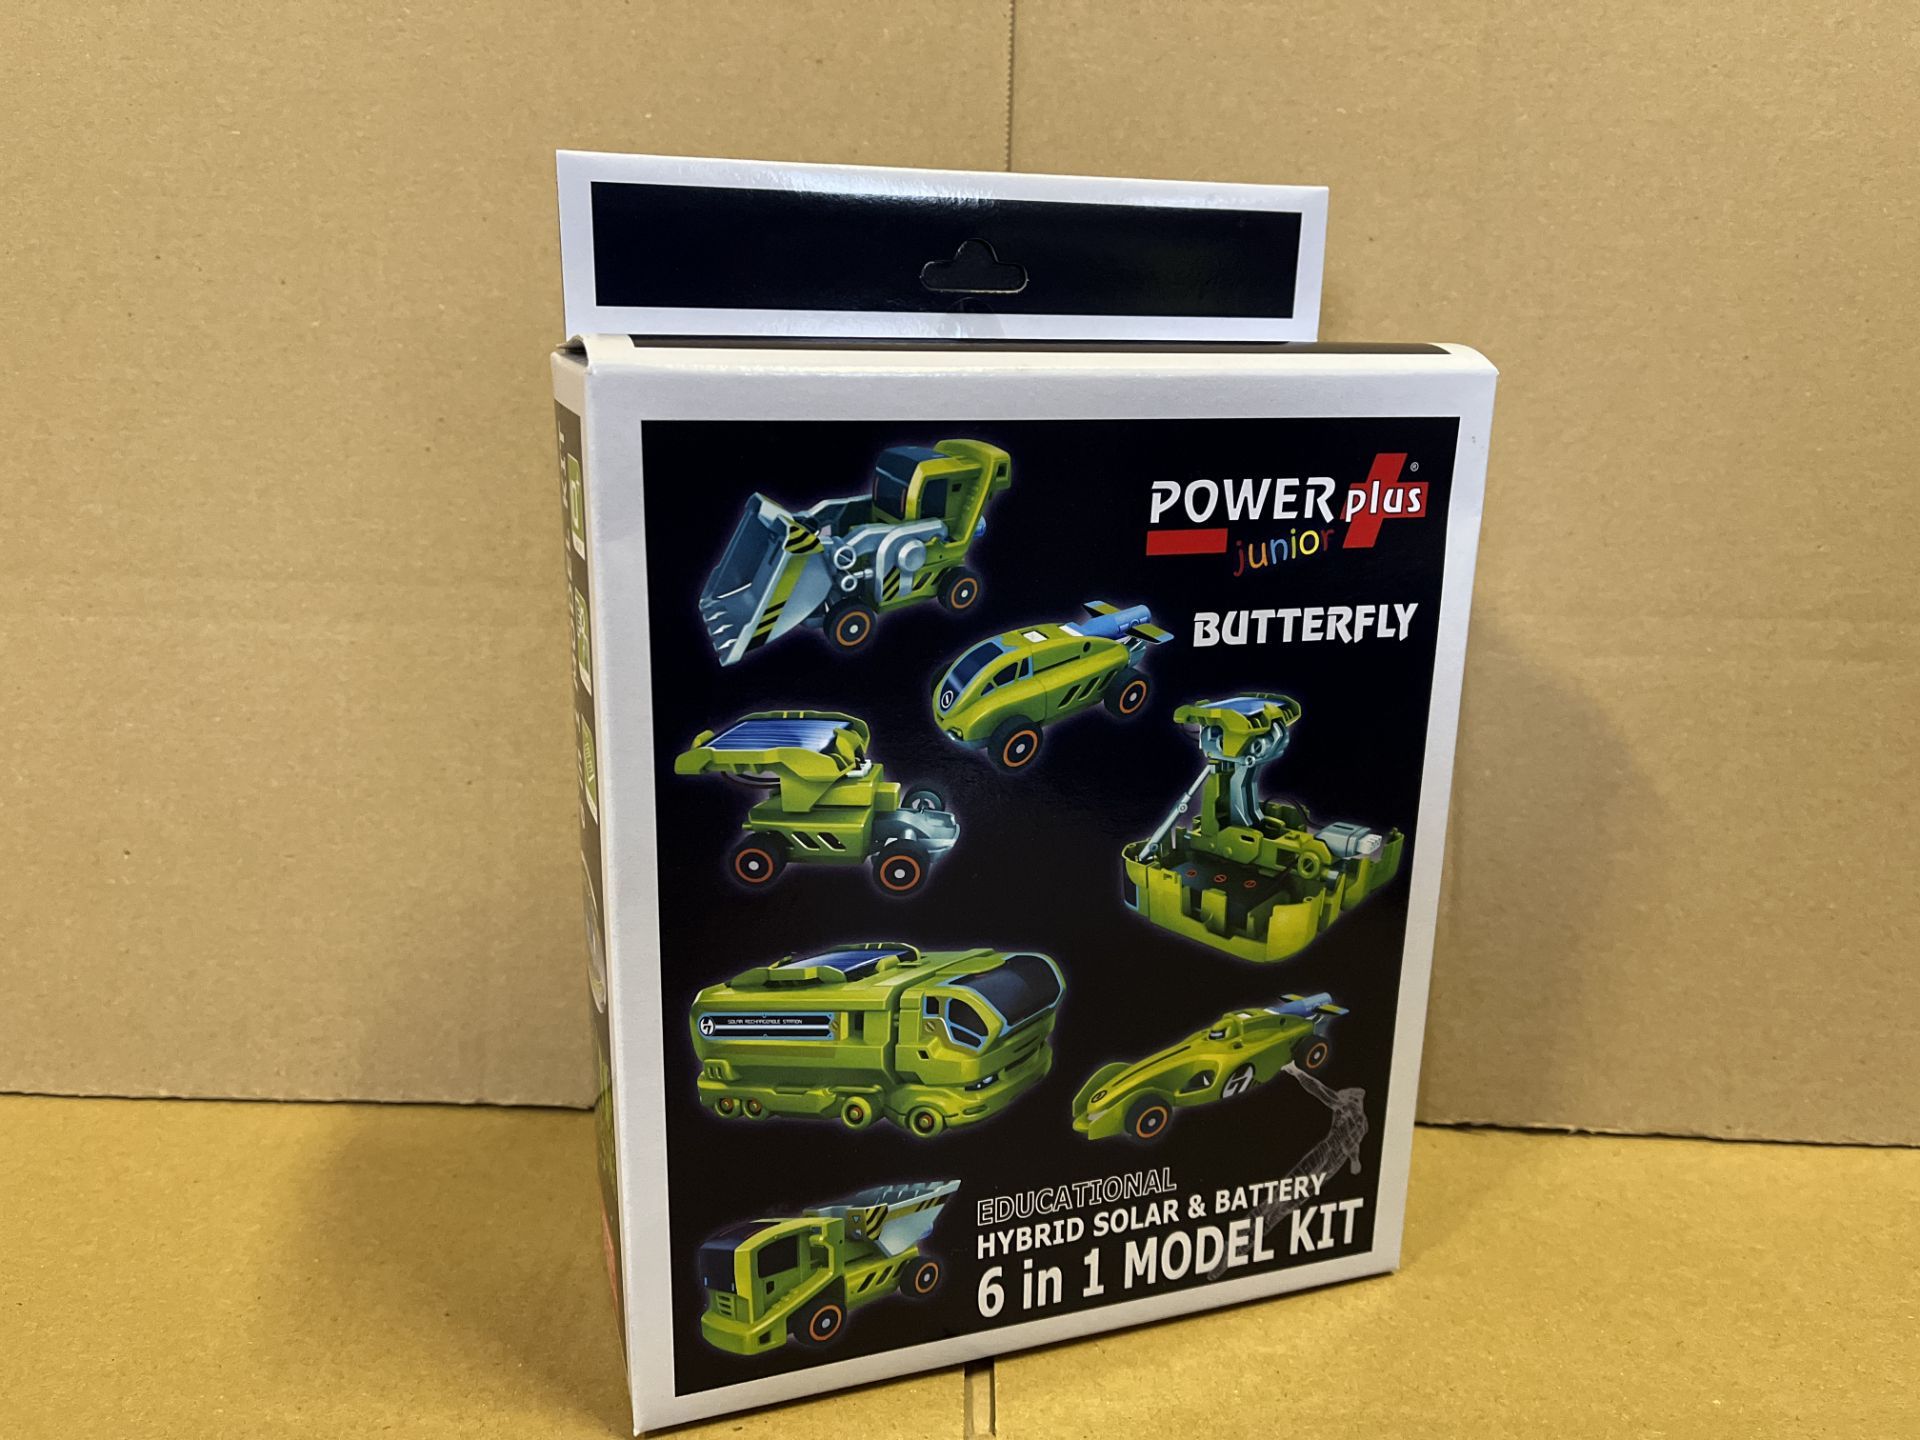 16 X BRAND NEW POWER PLUS JUNIOR EDUCATIONAL HYBRID SOLAR AND BATTERY 6 IN 1 MODEL KITS S1P